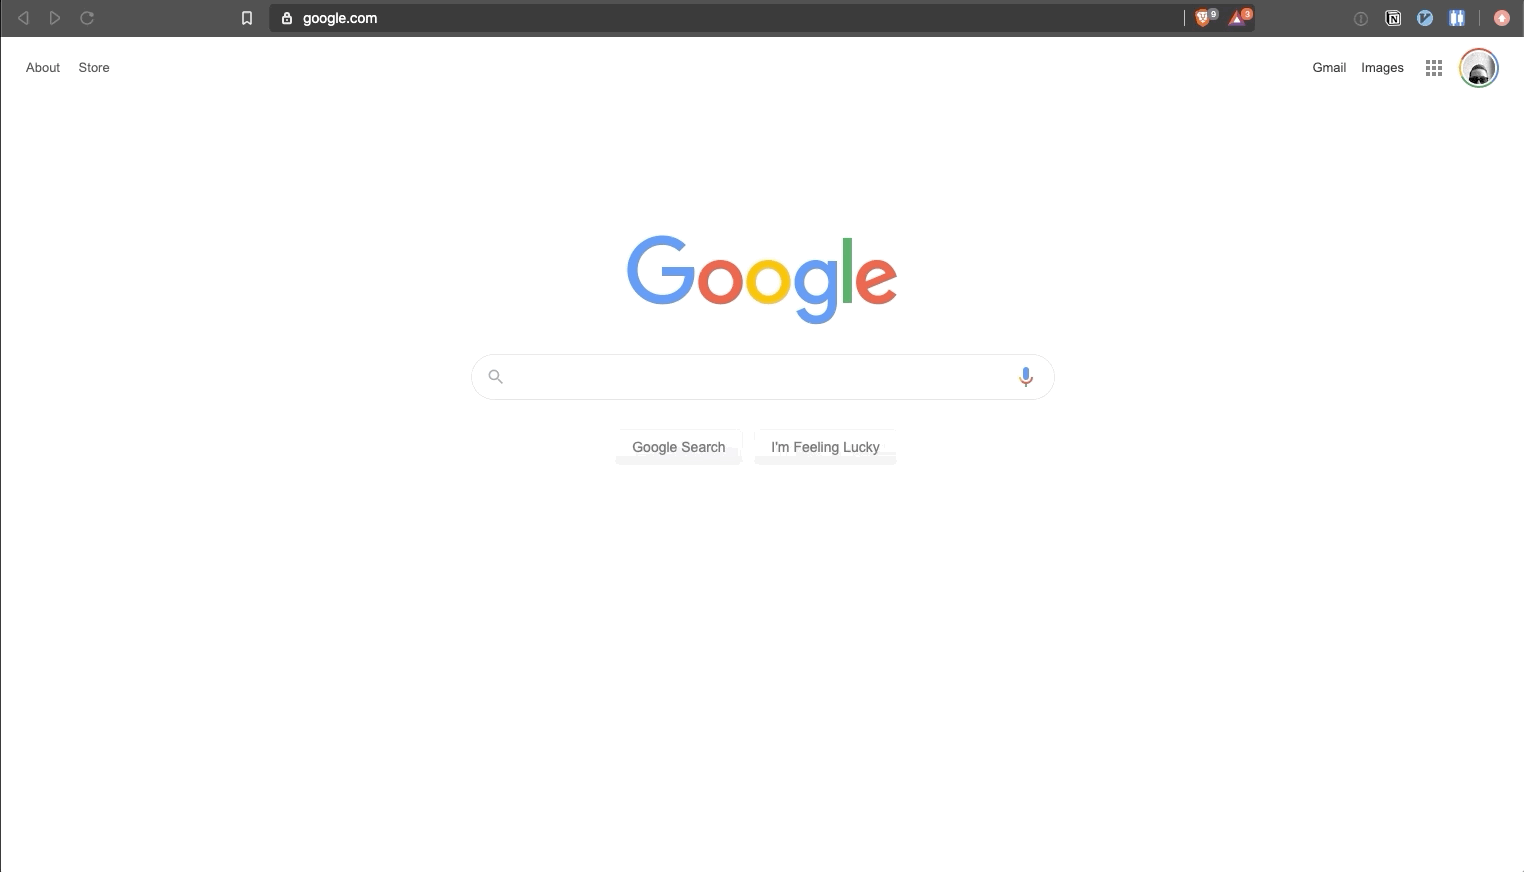 Gif of right-clicking the search field on Google.com and clicking “Inspect” to show the input element in the DOM inspector.